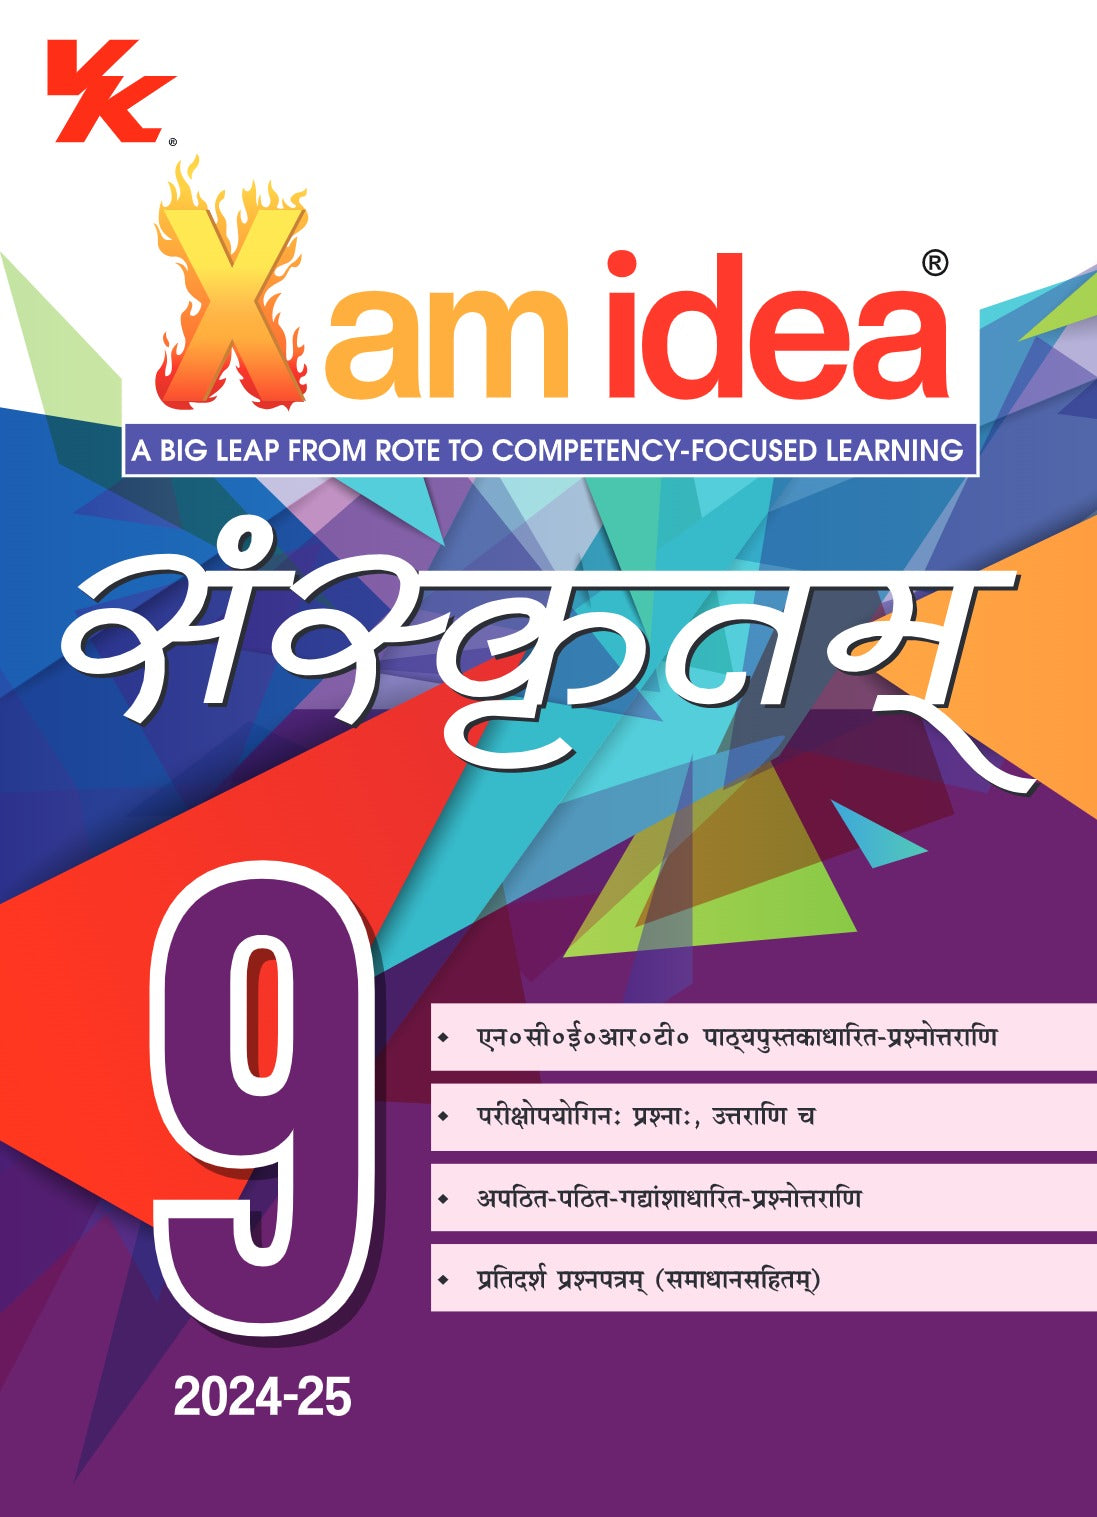 Xam idea Sanskrit Class 9 Book | CBSE Board | Chapterwise Question Bank | Based on Revised CBSE Syllabus | NCERT Questions Included | 2023-24 Exam